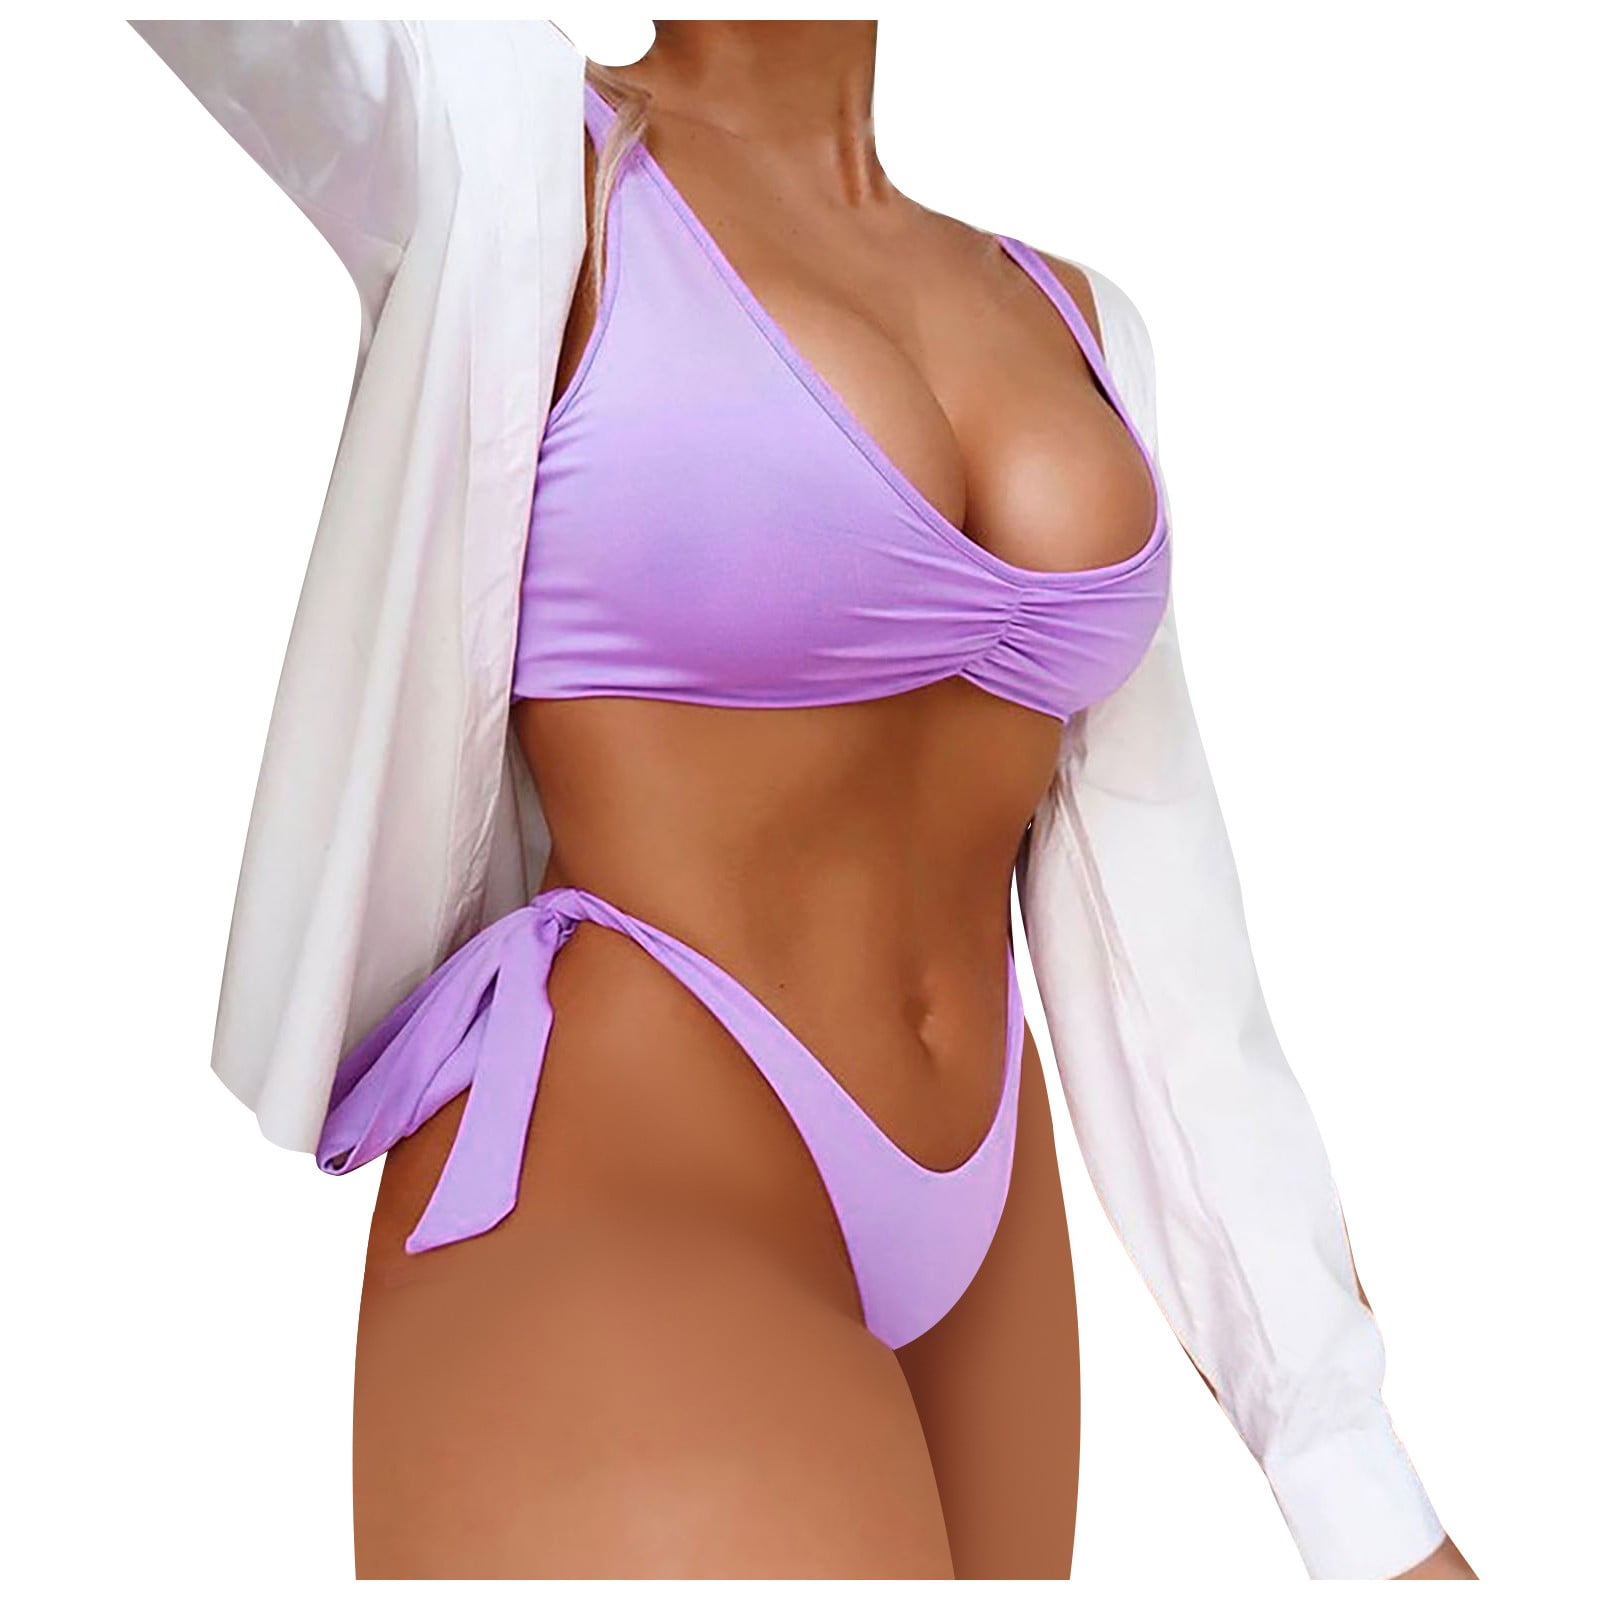 EHTMSAK Sexy Lingerie for Women Naughty for Sex Cosplay S Womens Lingerie  with Push Up Bra Support Bondaged Underwired Lingerie One Piece Babydoll 2  Piece Purple Tie Lingerie 